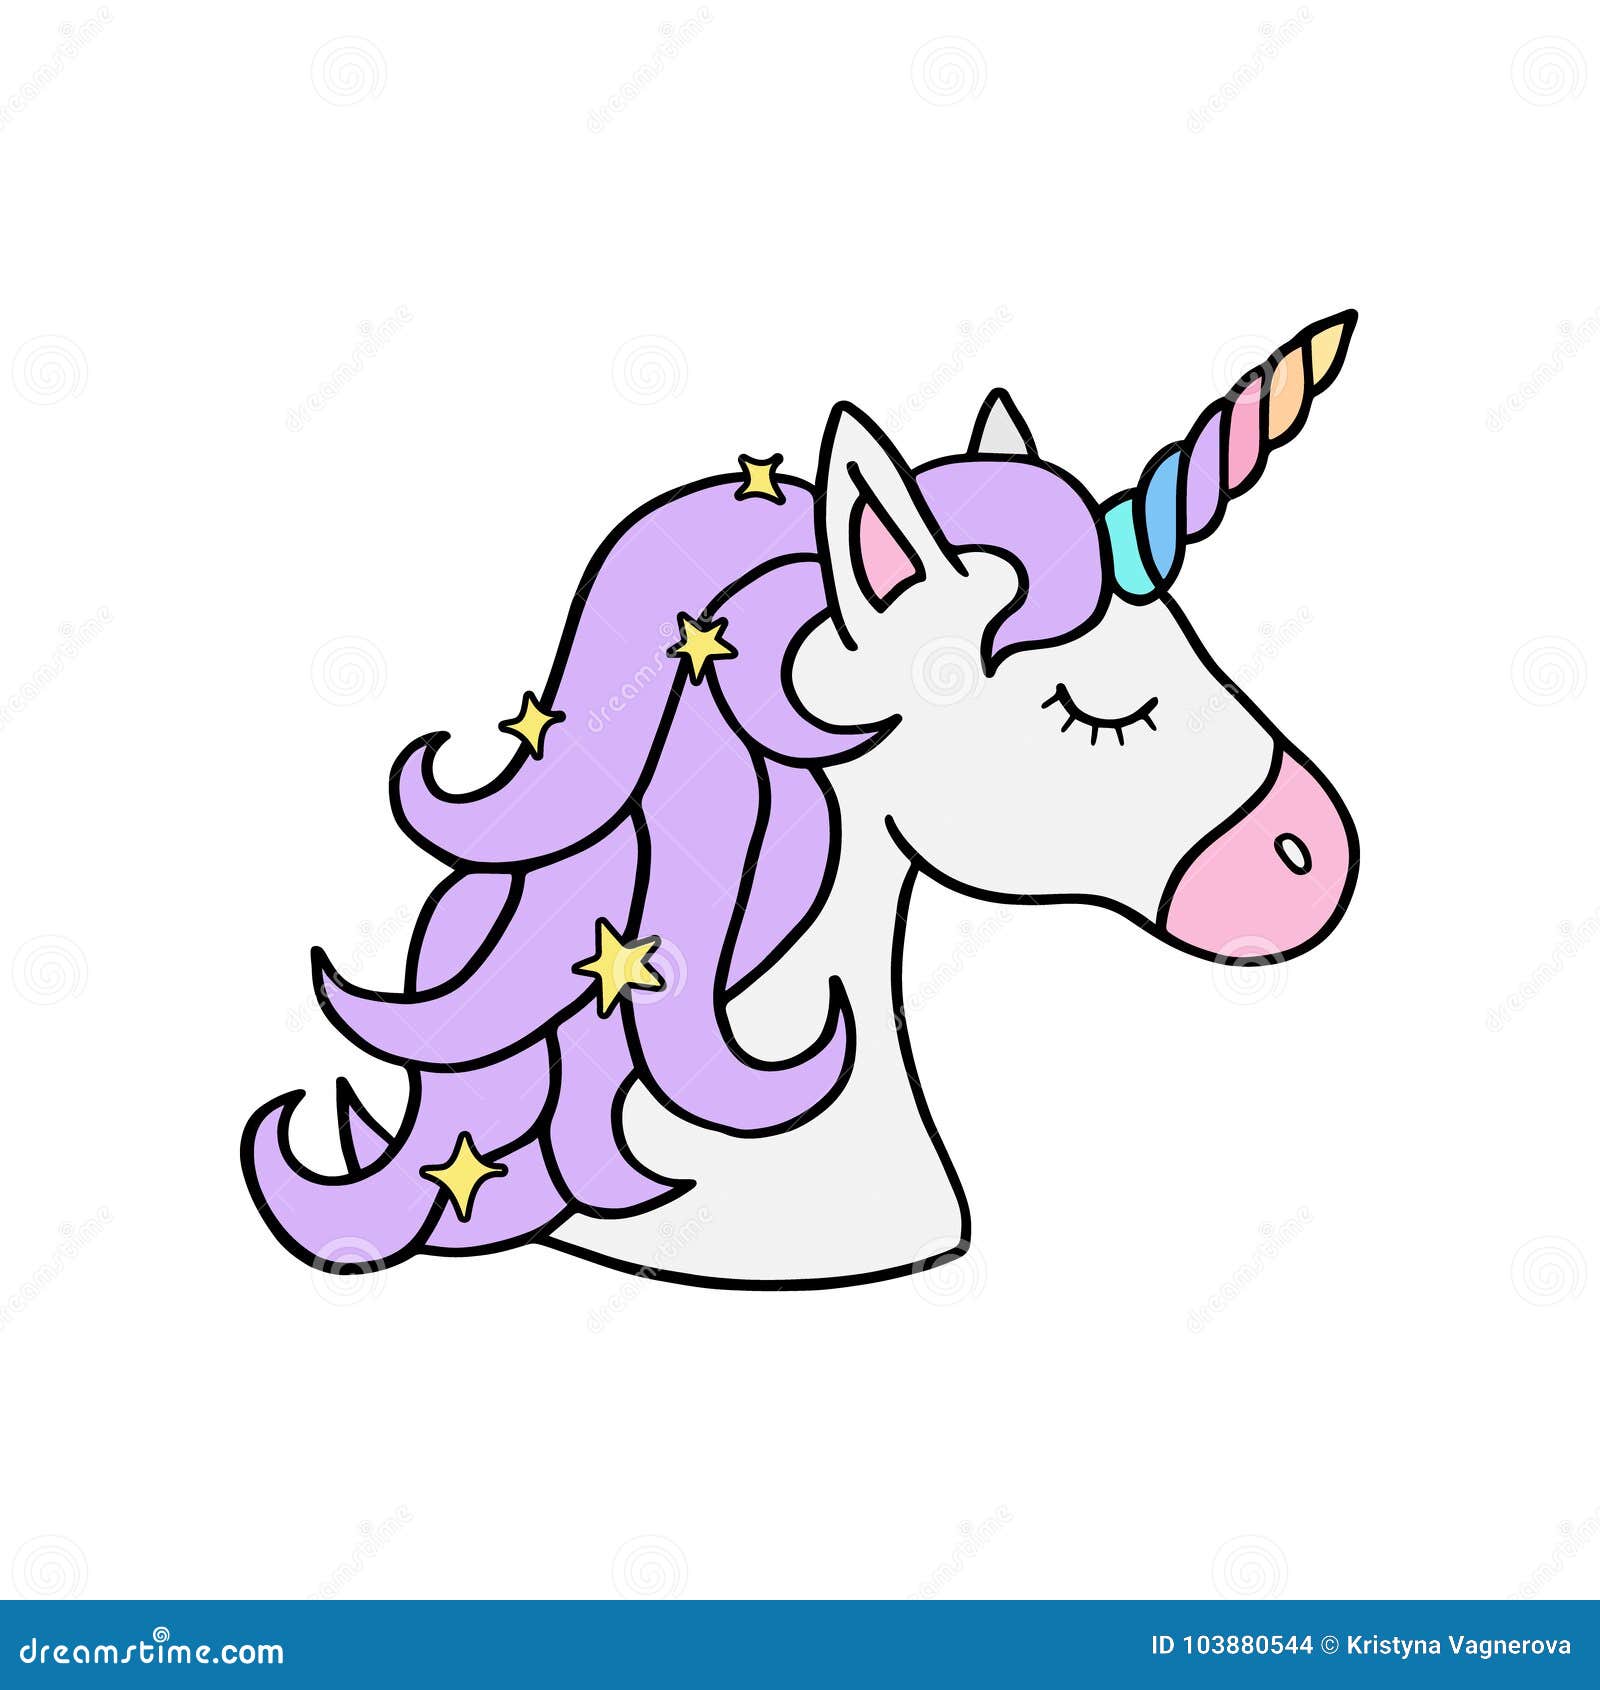 Unicorn with Rainbow coloring page | Free Printable Coloring Pages-saigonsouth.com.vn